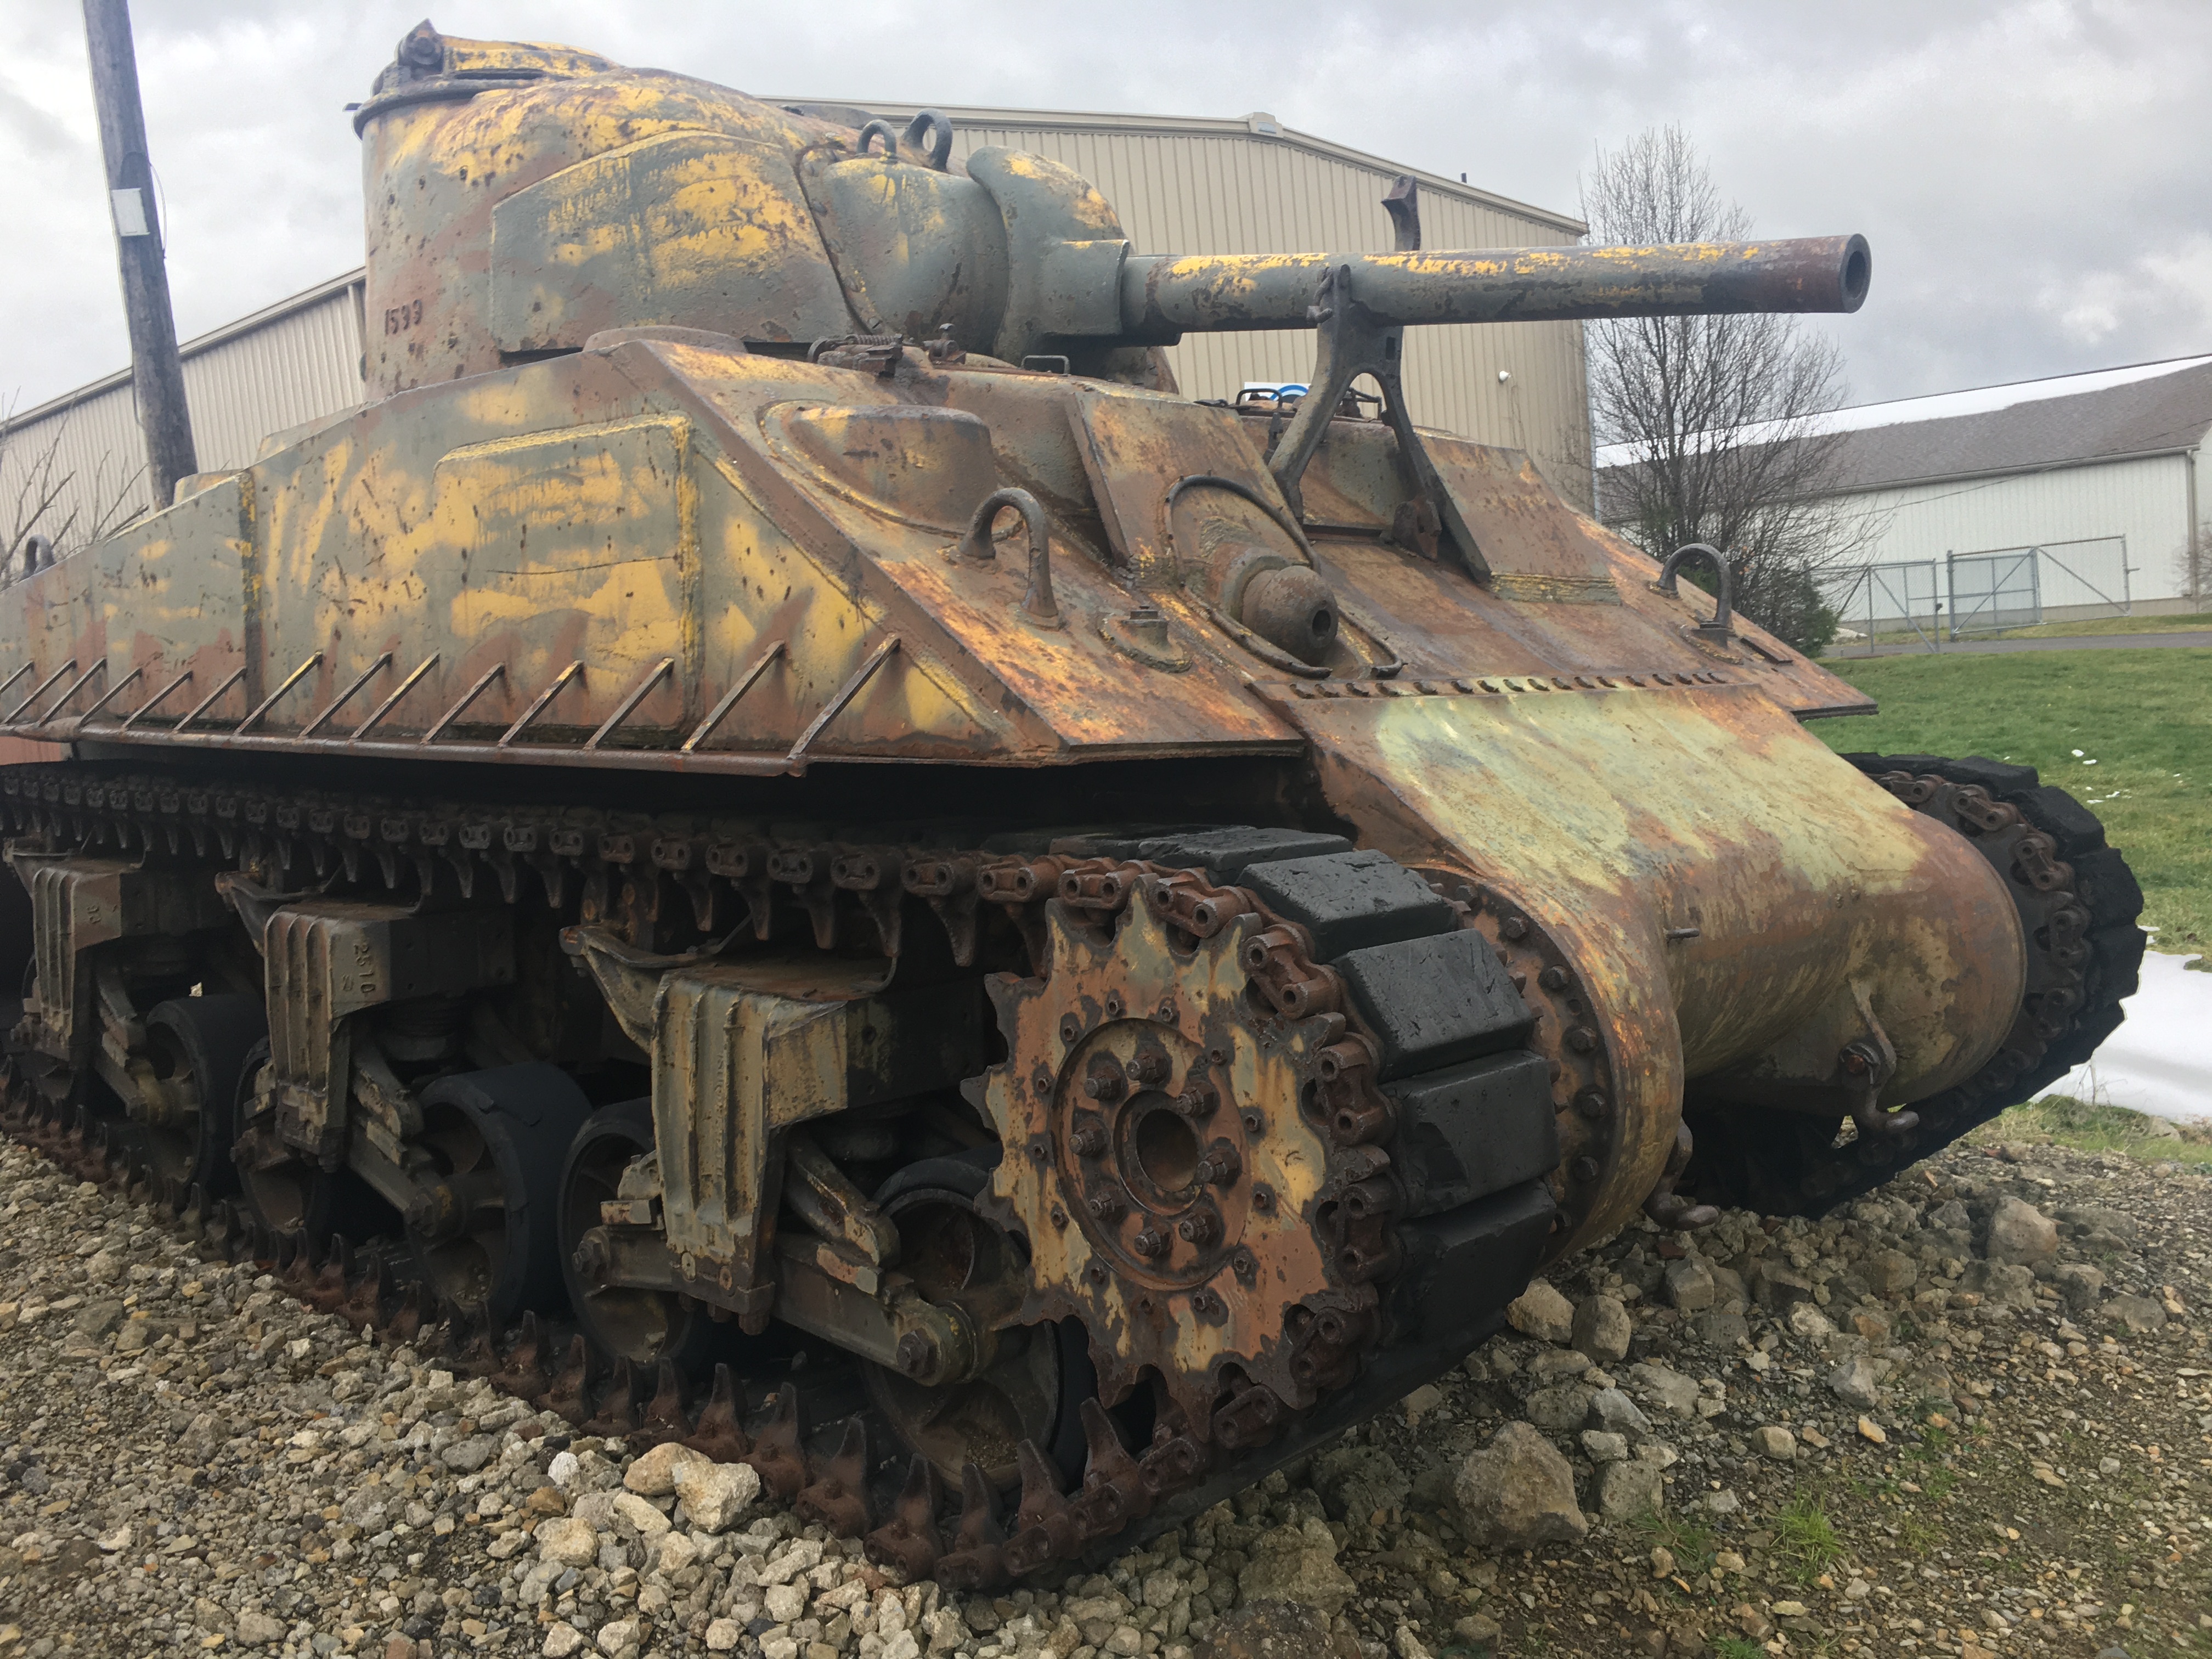 Nice little Sherman here, FOR SALE